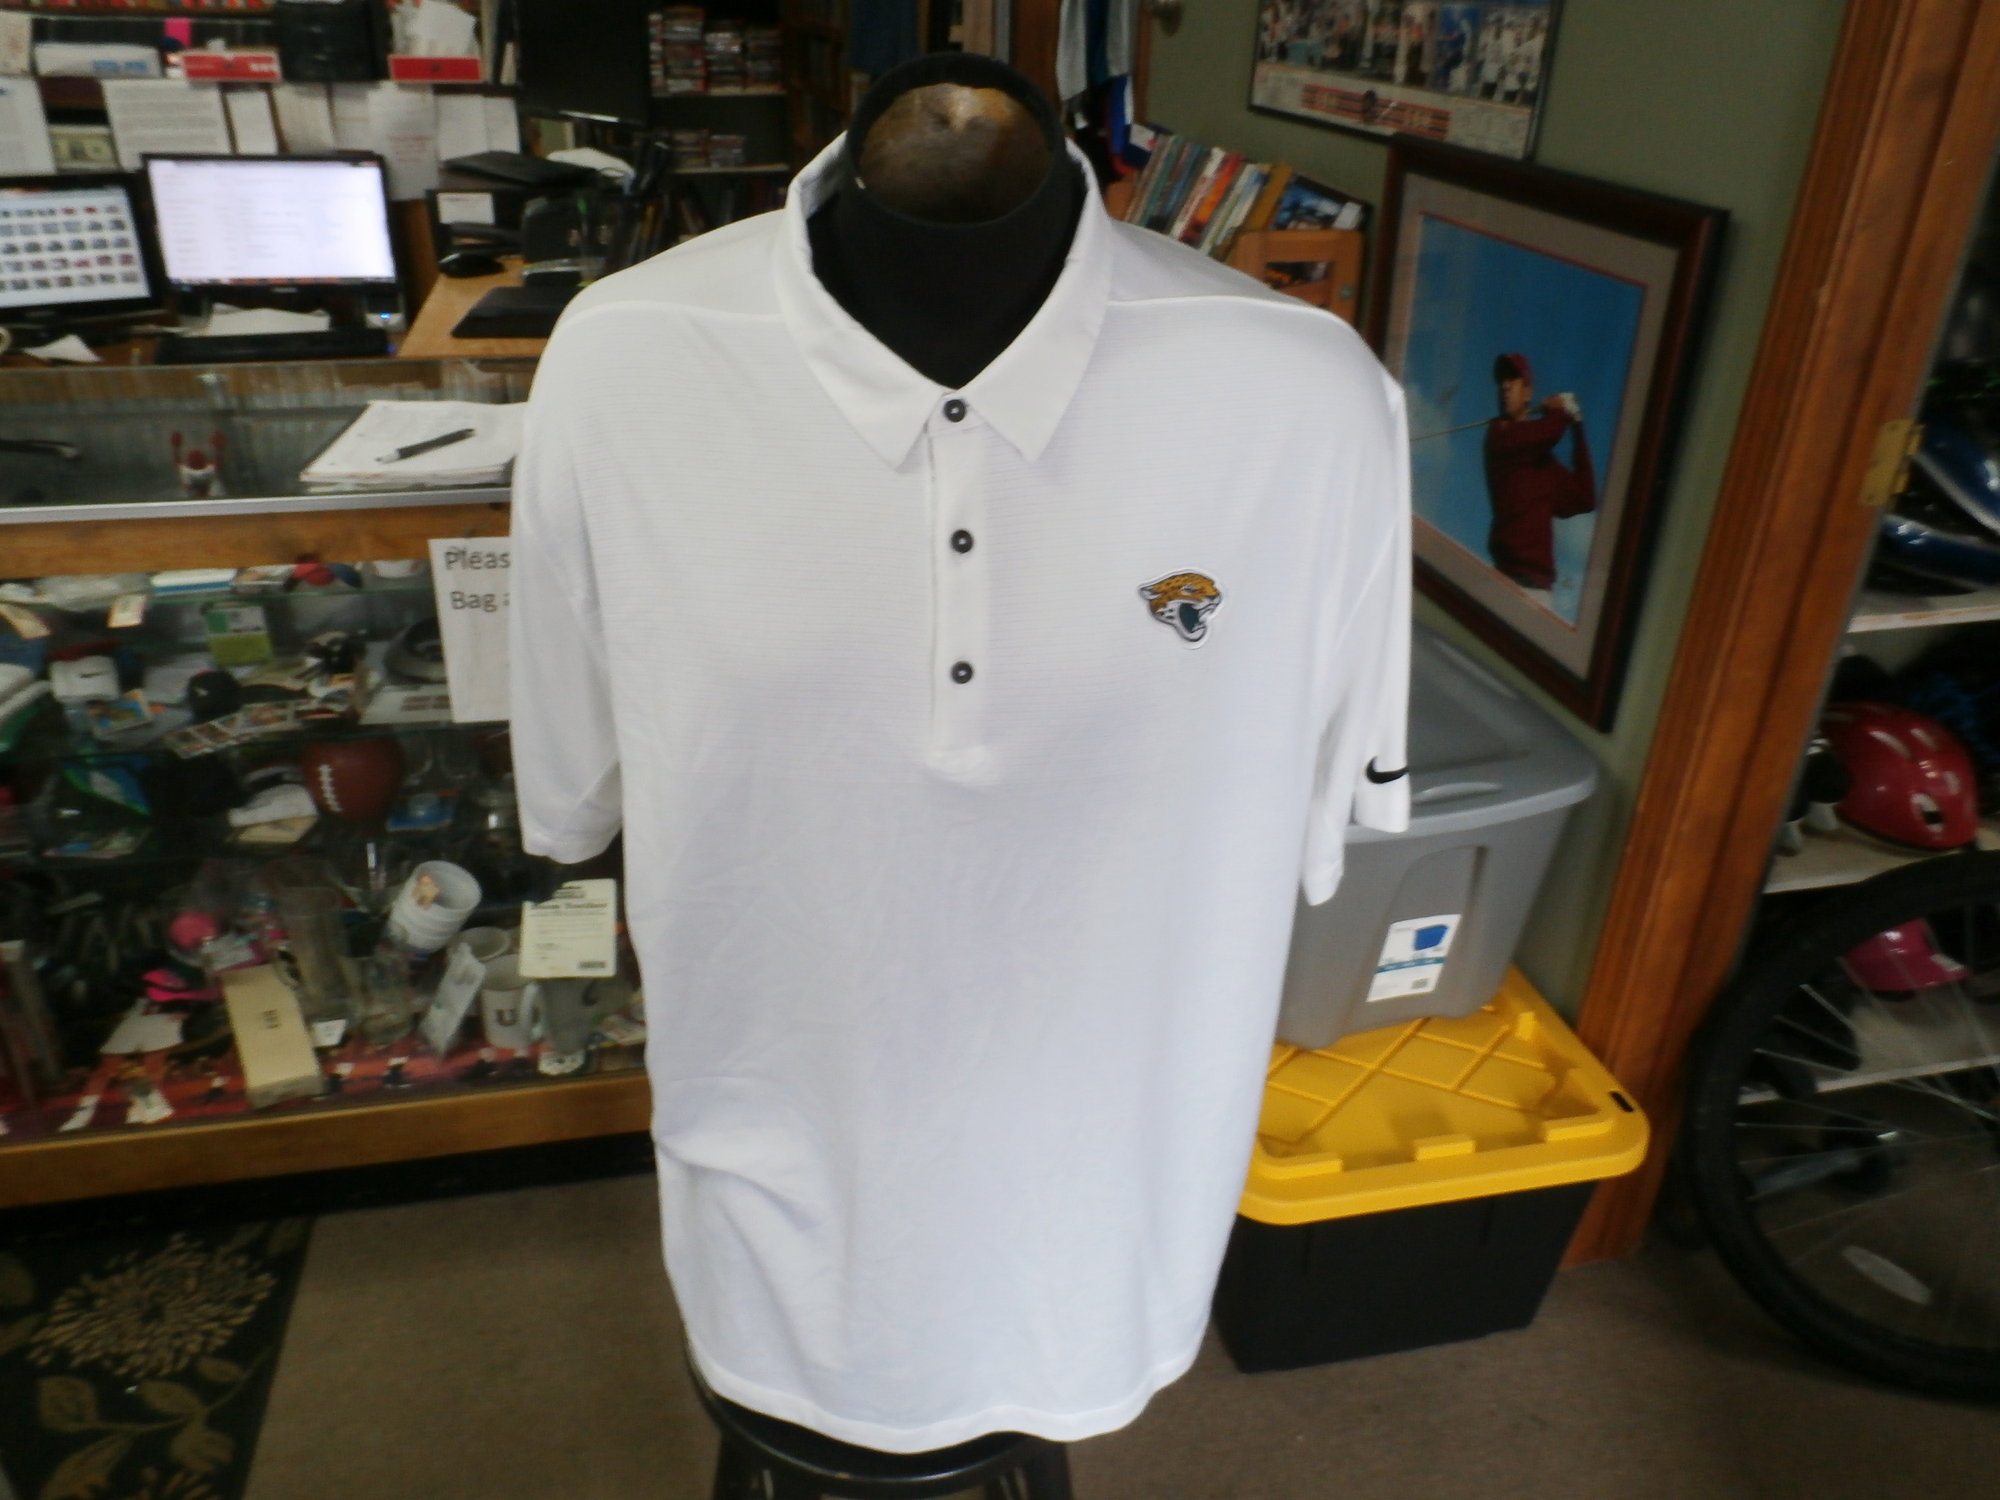 Title: Jacksonville Jaguars white Nike polo 3XL #30725
Our Clothes Rating: 3- Good Condition
Brand: Nike
size: Men's 3XL- (Across chest: 28\" Length: 31\")
color: white
Style: short sleeve; embroidered
Condition: 3- Good Condition - minor wear; a couple of medium-sized snags
Item #: 30725
Shipping: FREE